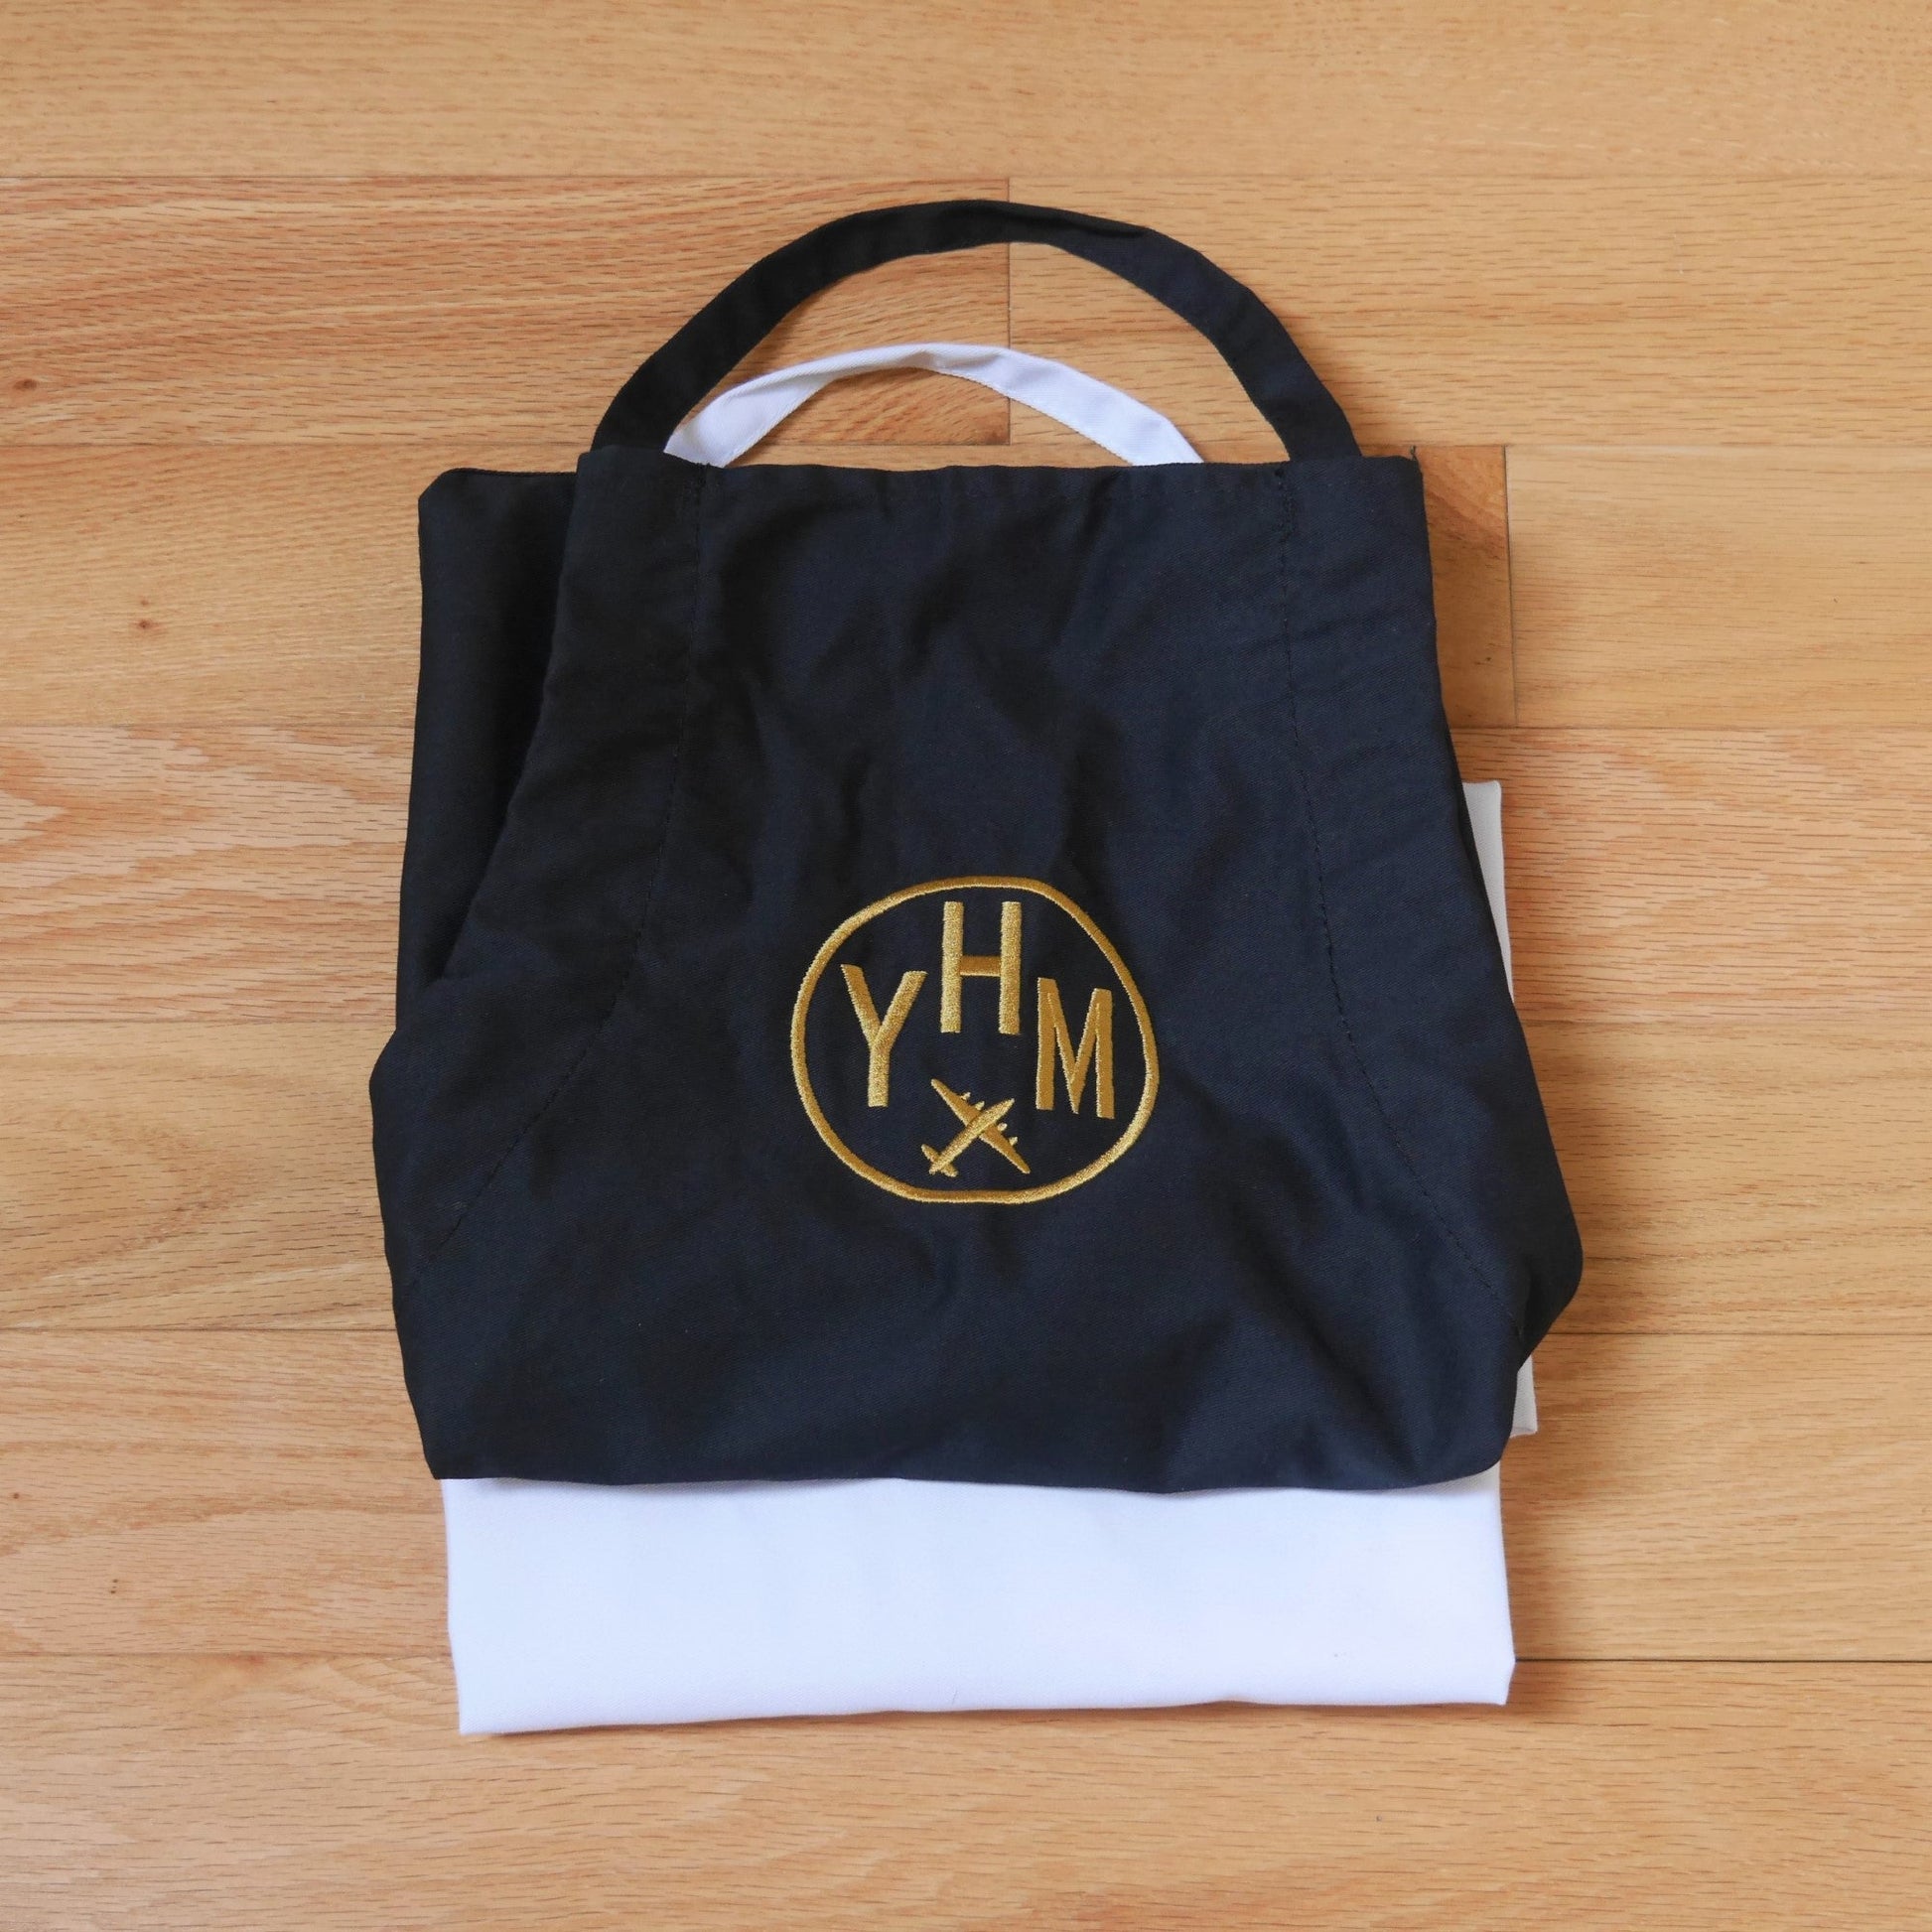 City Embroidered Apron - Old Gold • SAN San Diego • YHM Designs - Image 16